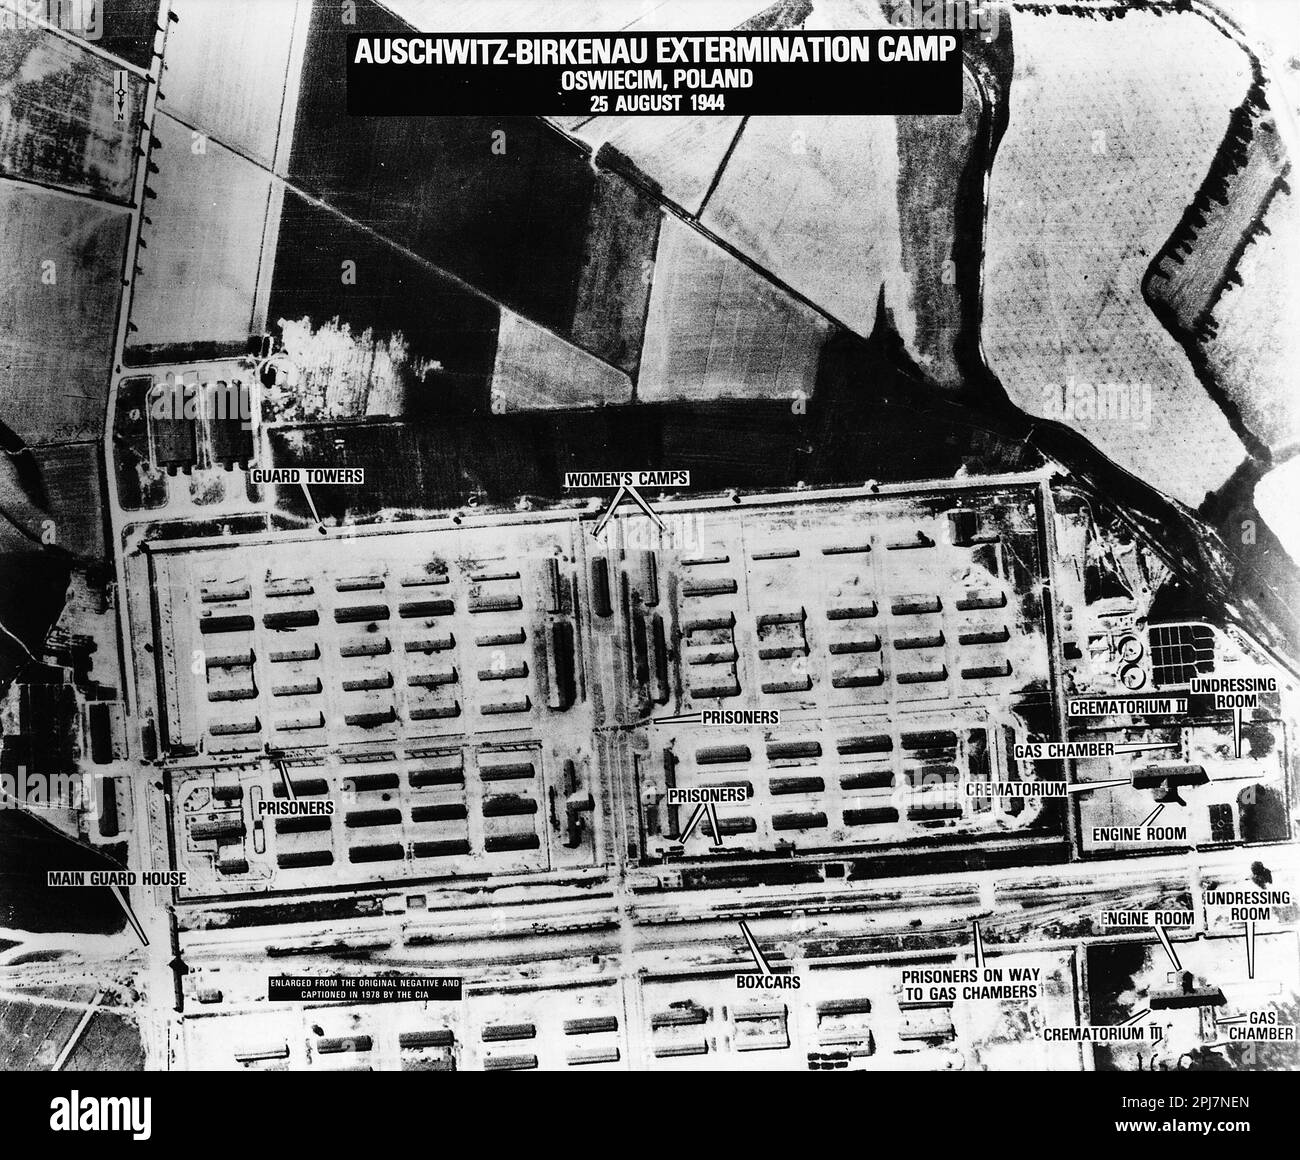 Photograph of the German extermination camp at Auschwitz II-Birkenau in occupied Poland, taken by a United States Army Air Force plane on August 25, 1944. Crematoria II and III are visible. Stock Photo